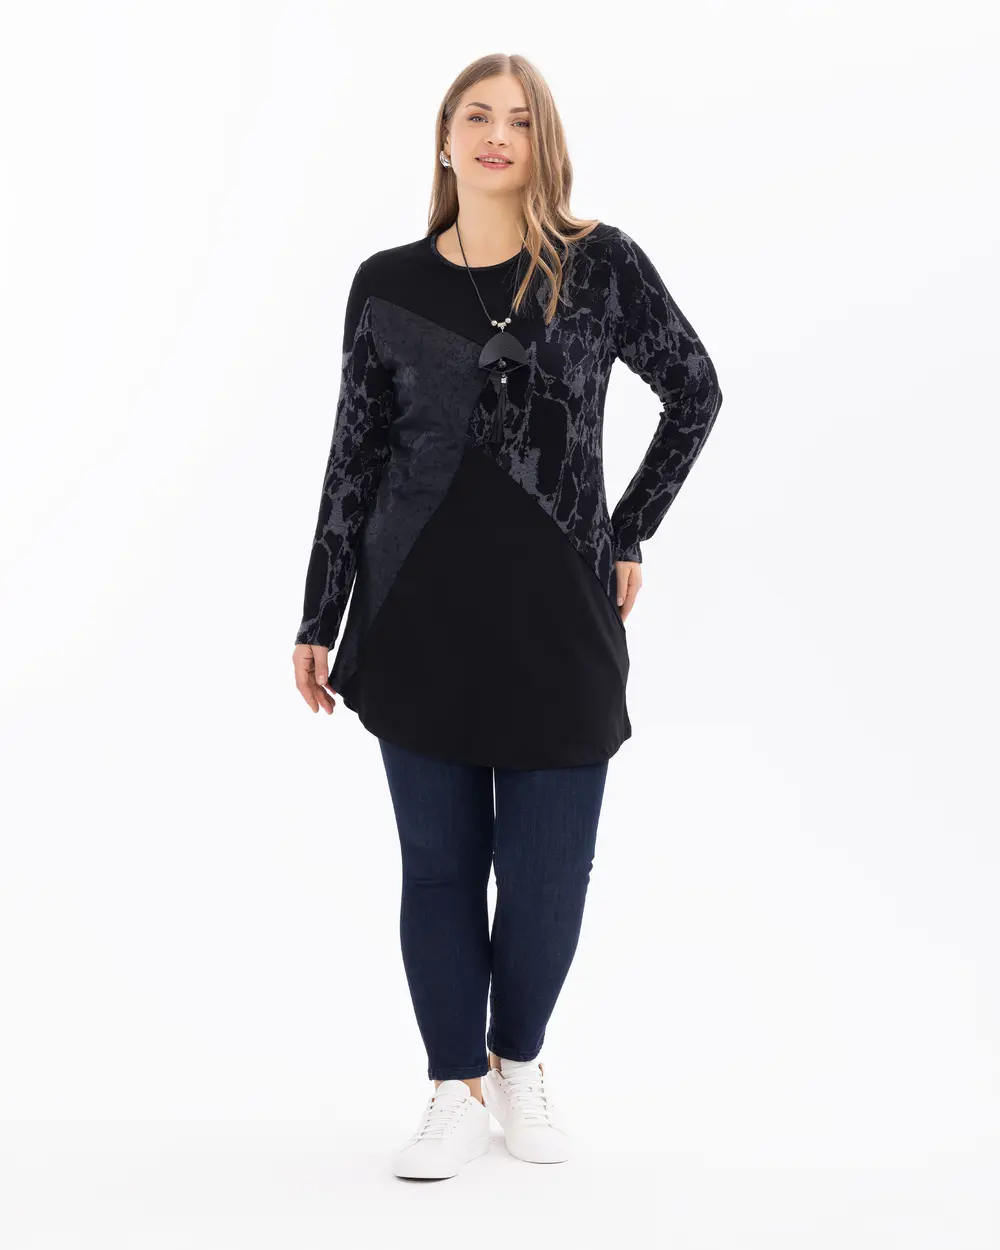 Plus Size Long Sleeve Tunic with Accessories